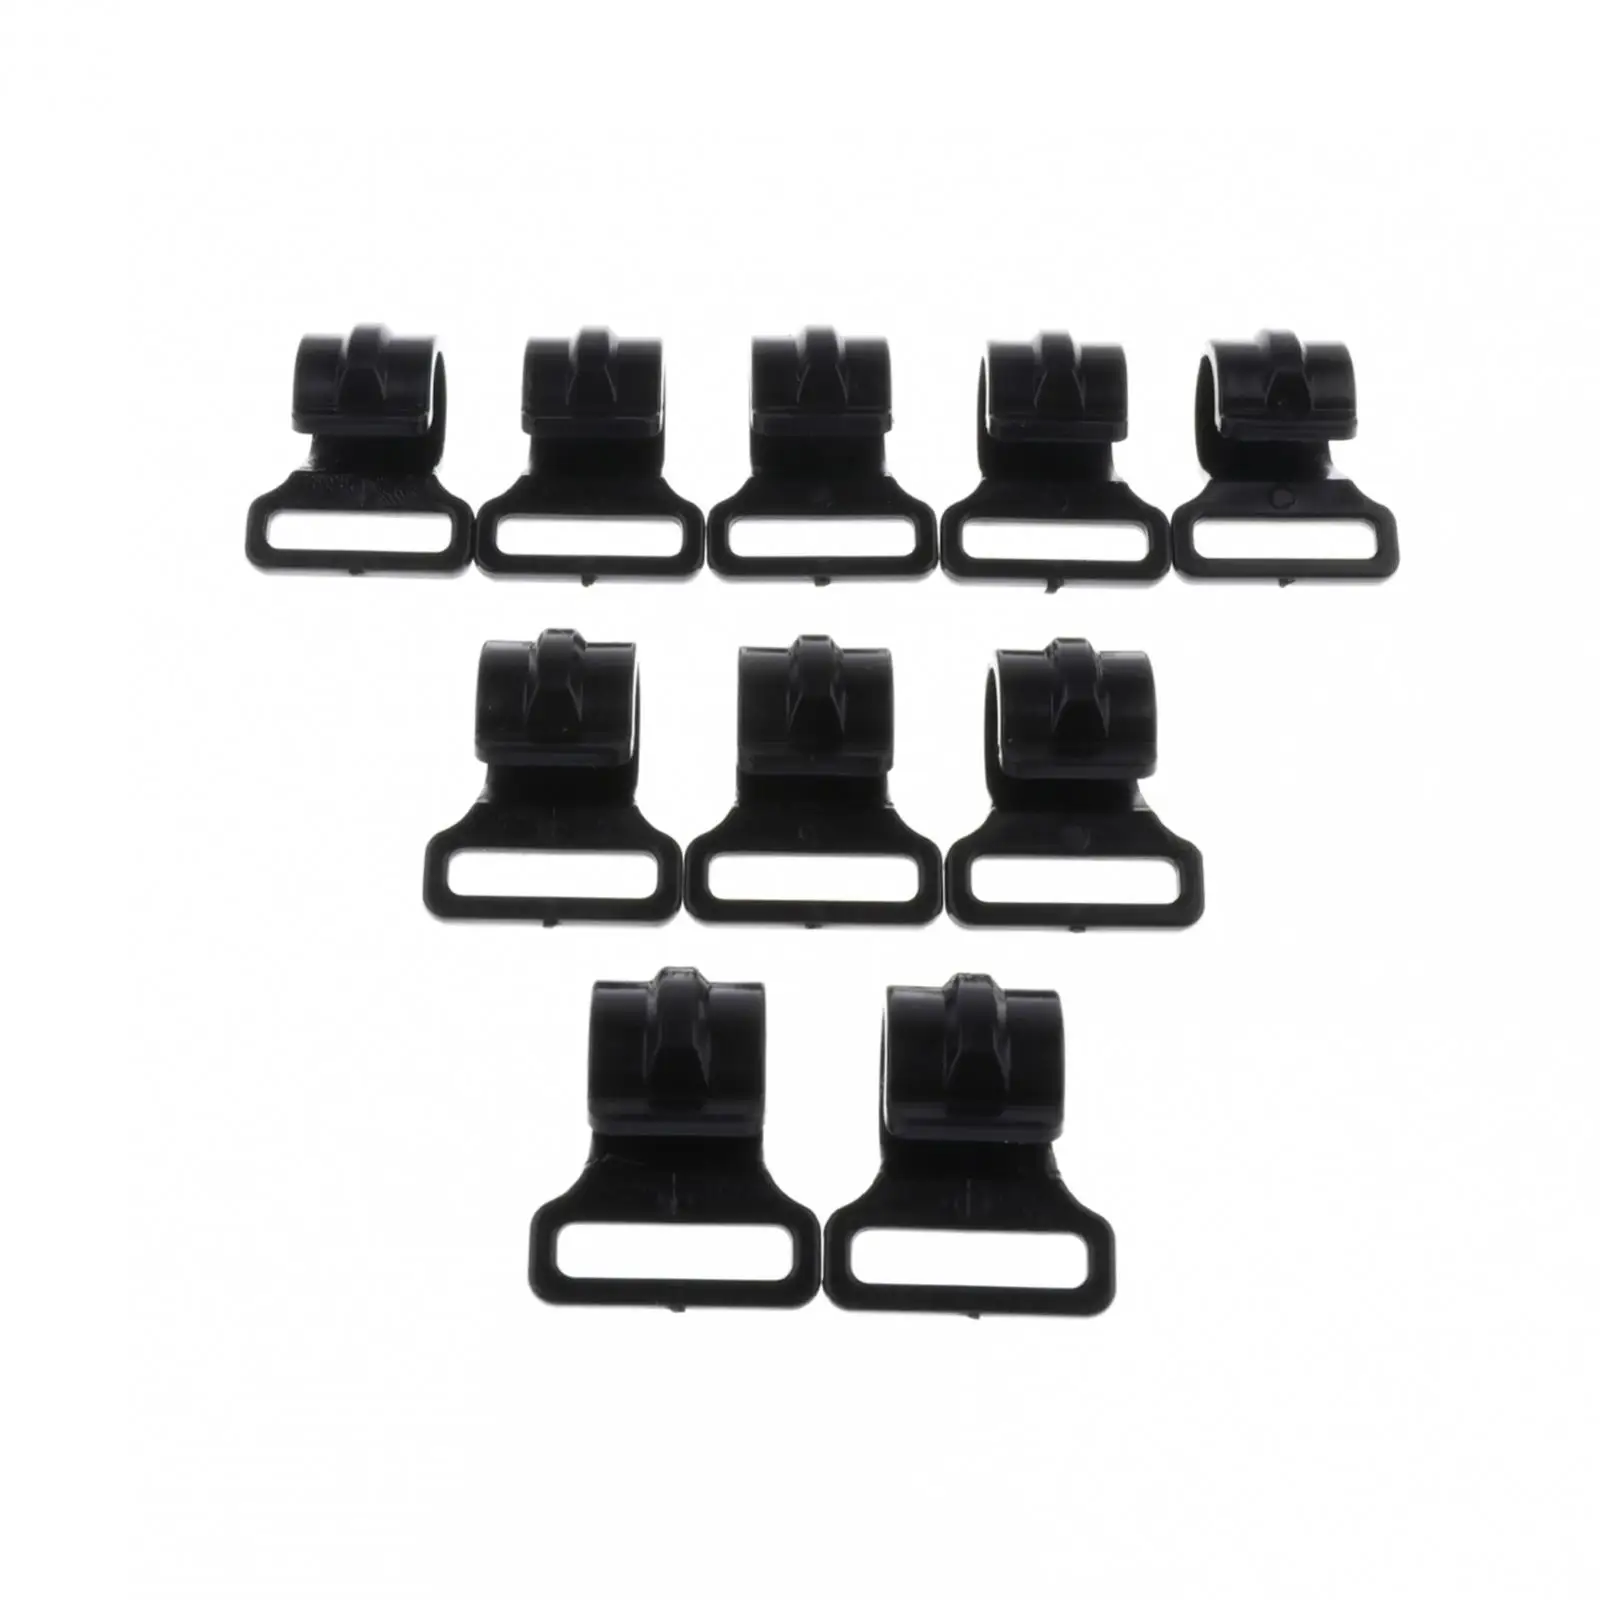 10x High-Quality PVC Camping Tent Clips Clamp Tent Accessories High-strength Fasteners 2.5cm For Outdoor Camping Tent